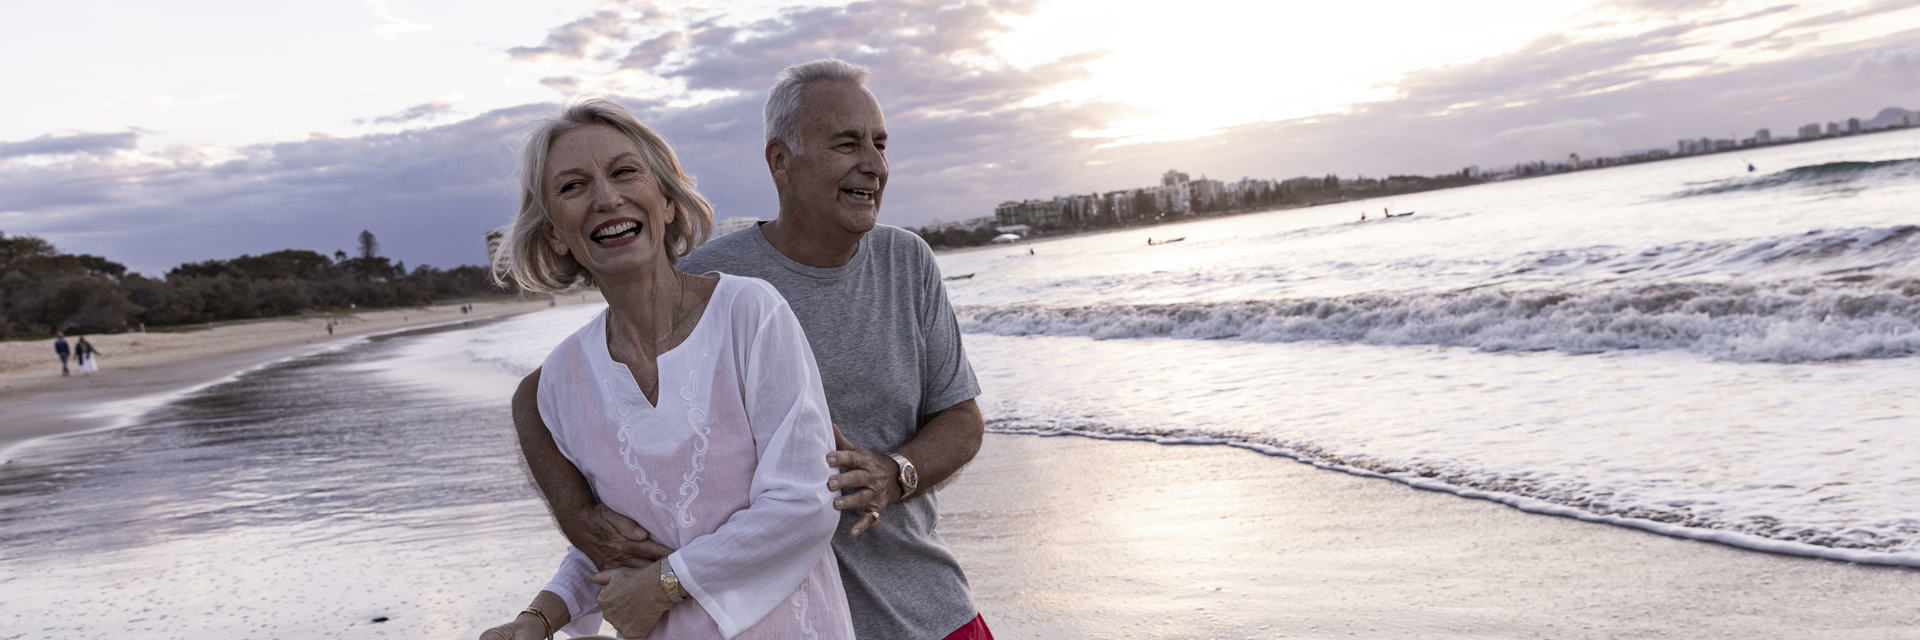 A man and woman embrace playfully overlooking the ocean at sunset whilst wearing summer clothing.